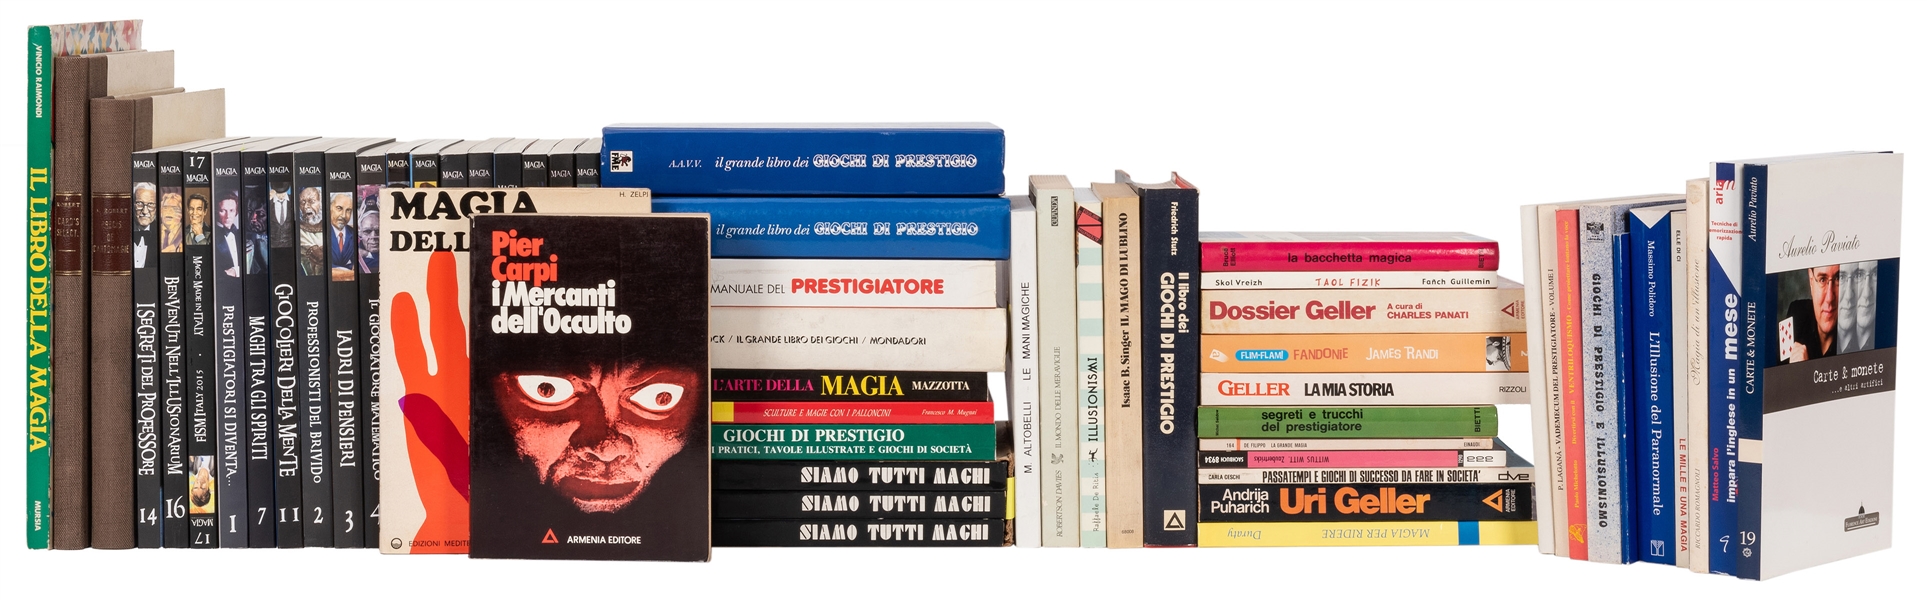 Collection of Italian Books on Magic and Conjuring. Roxy Collection.